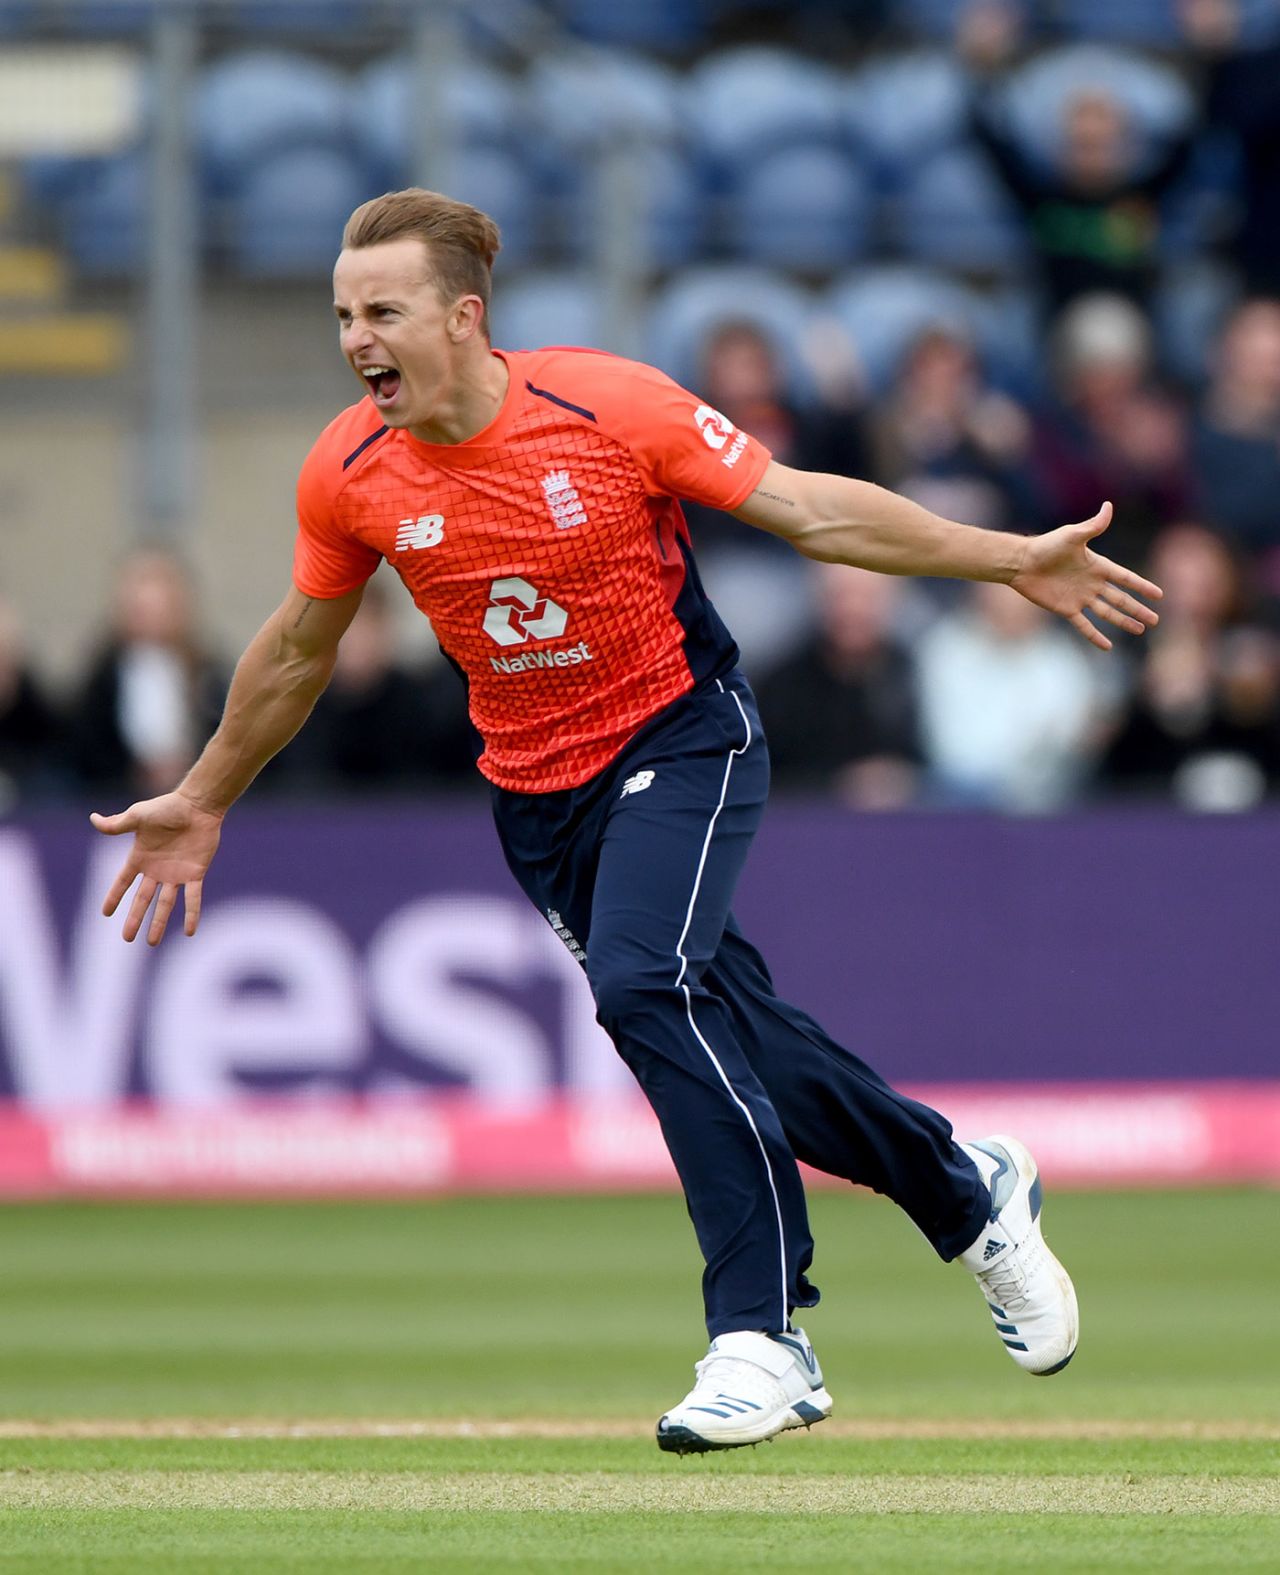 Tom Curran celebrates an early wicket, England v Pakistan, only T20I, Cardiff, May 5, 2019